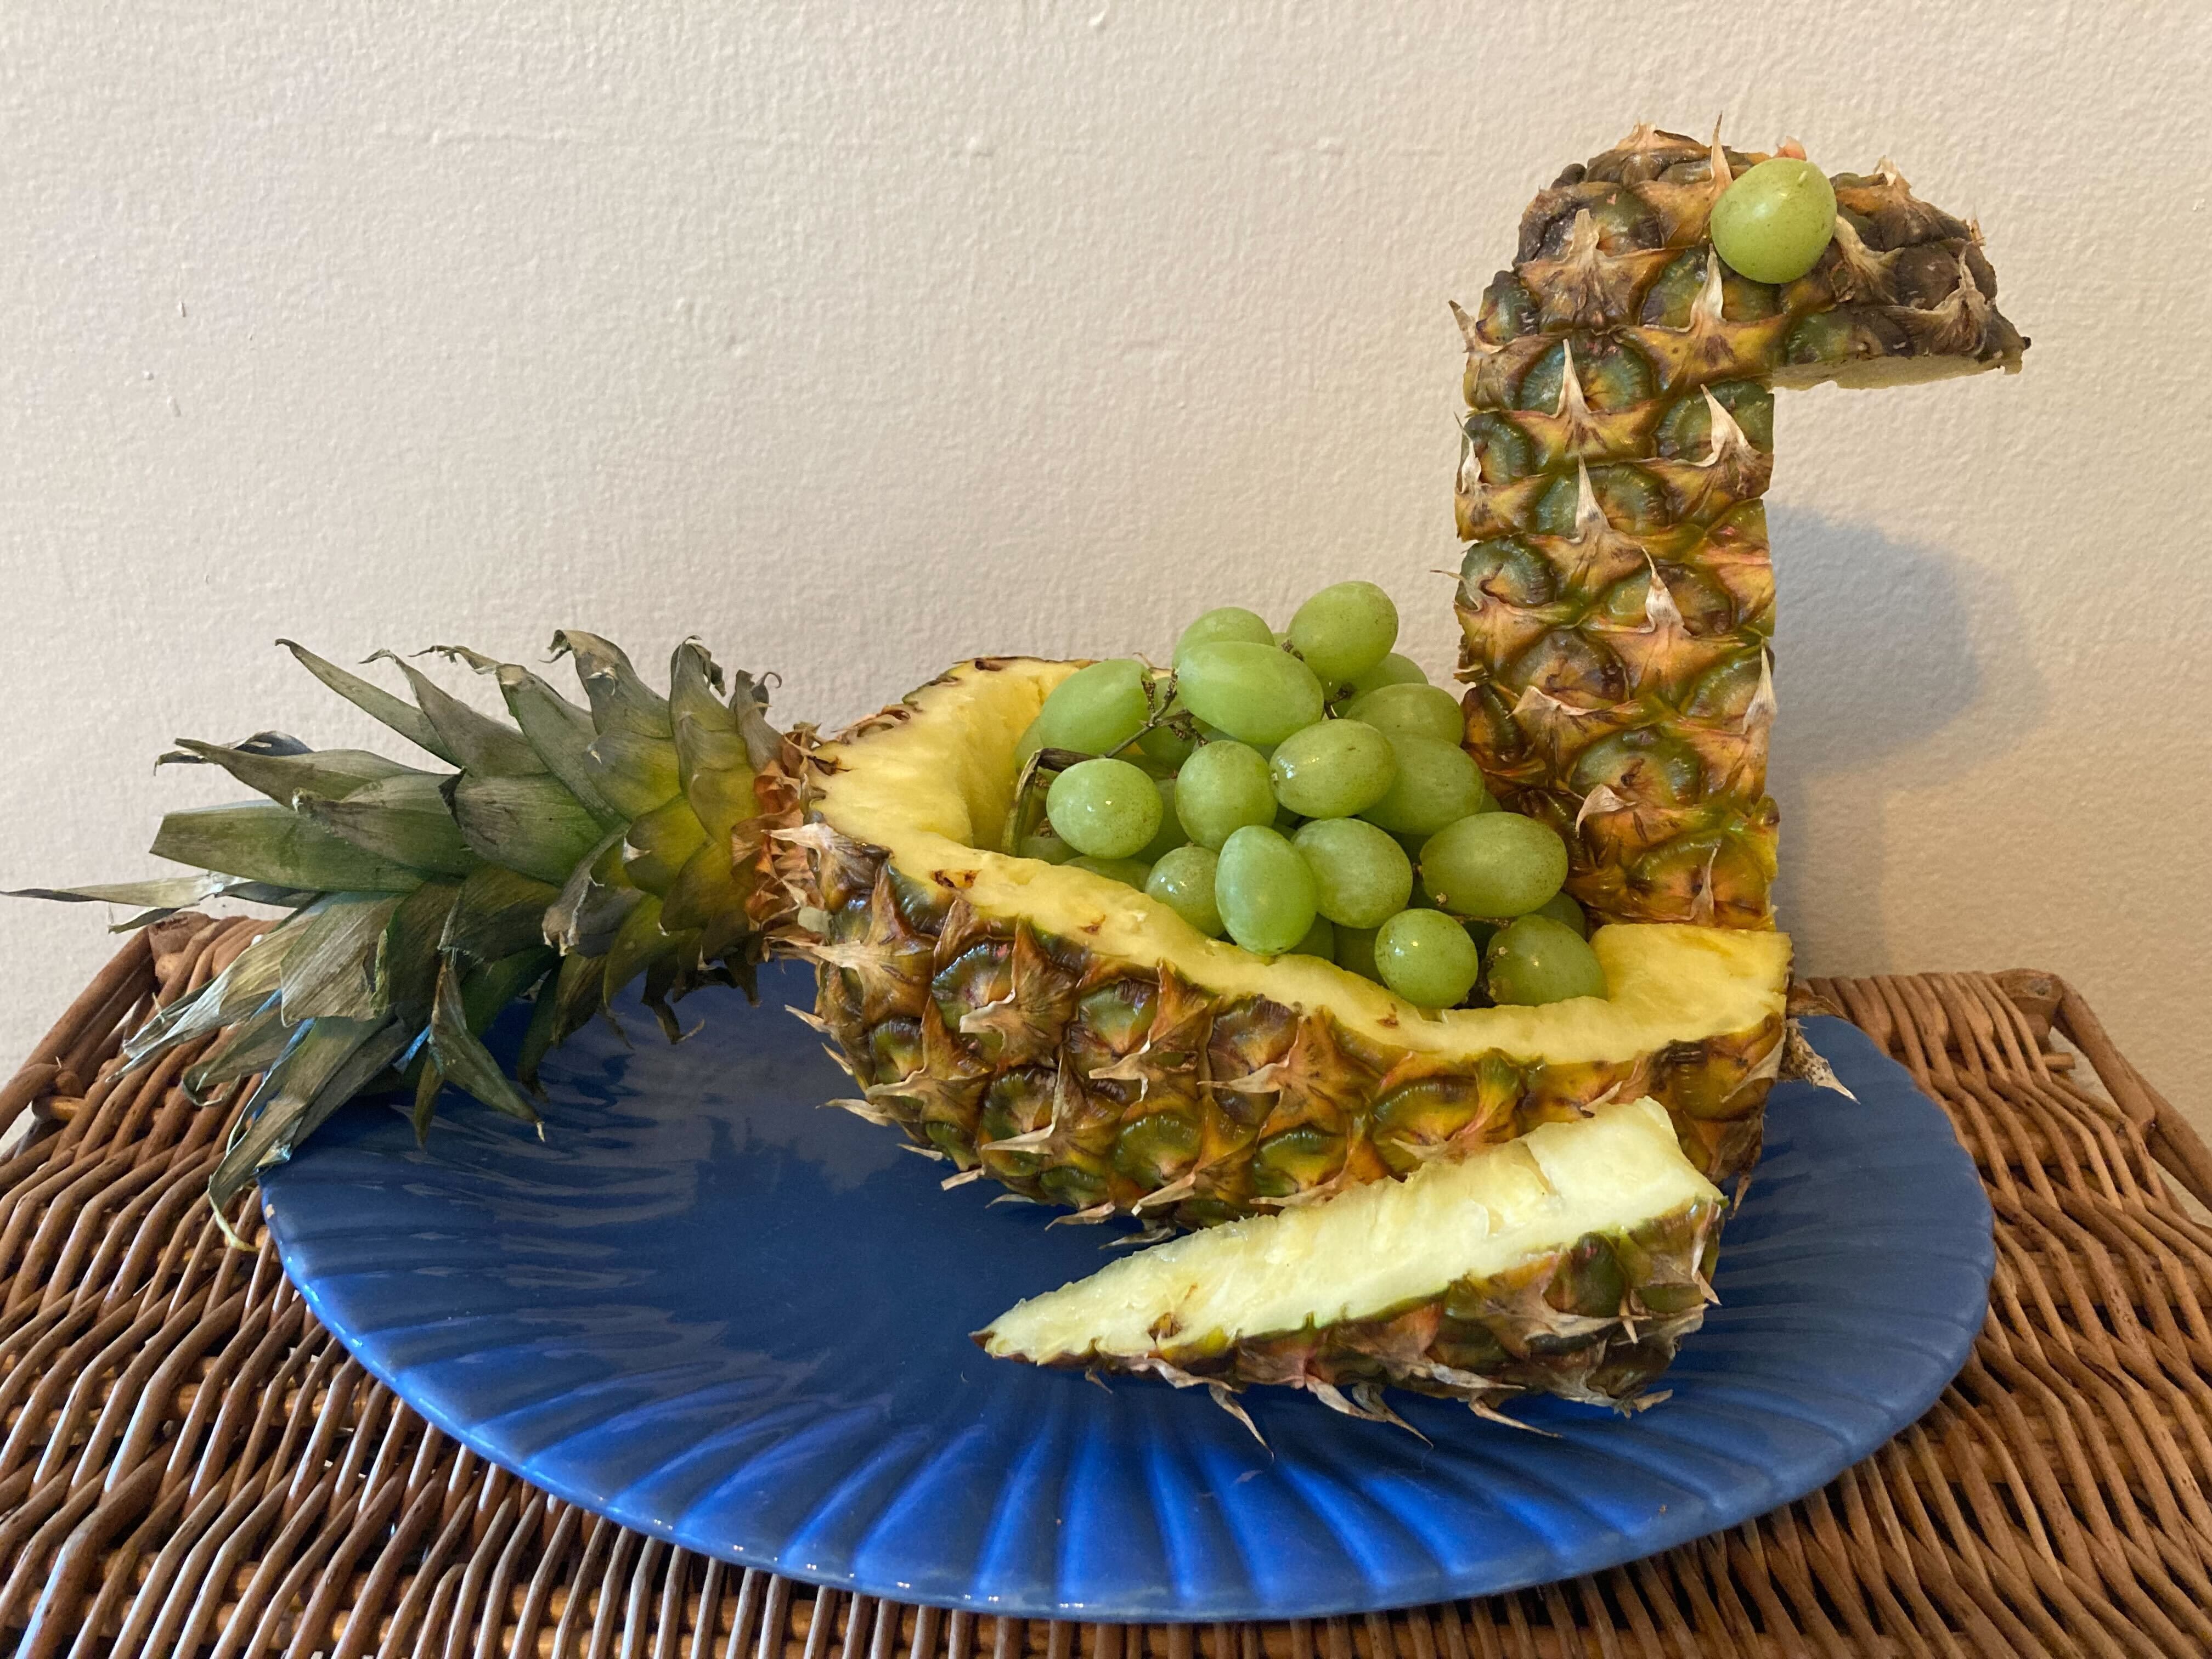 I filled my pineapple bird of paradise with grapes.